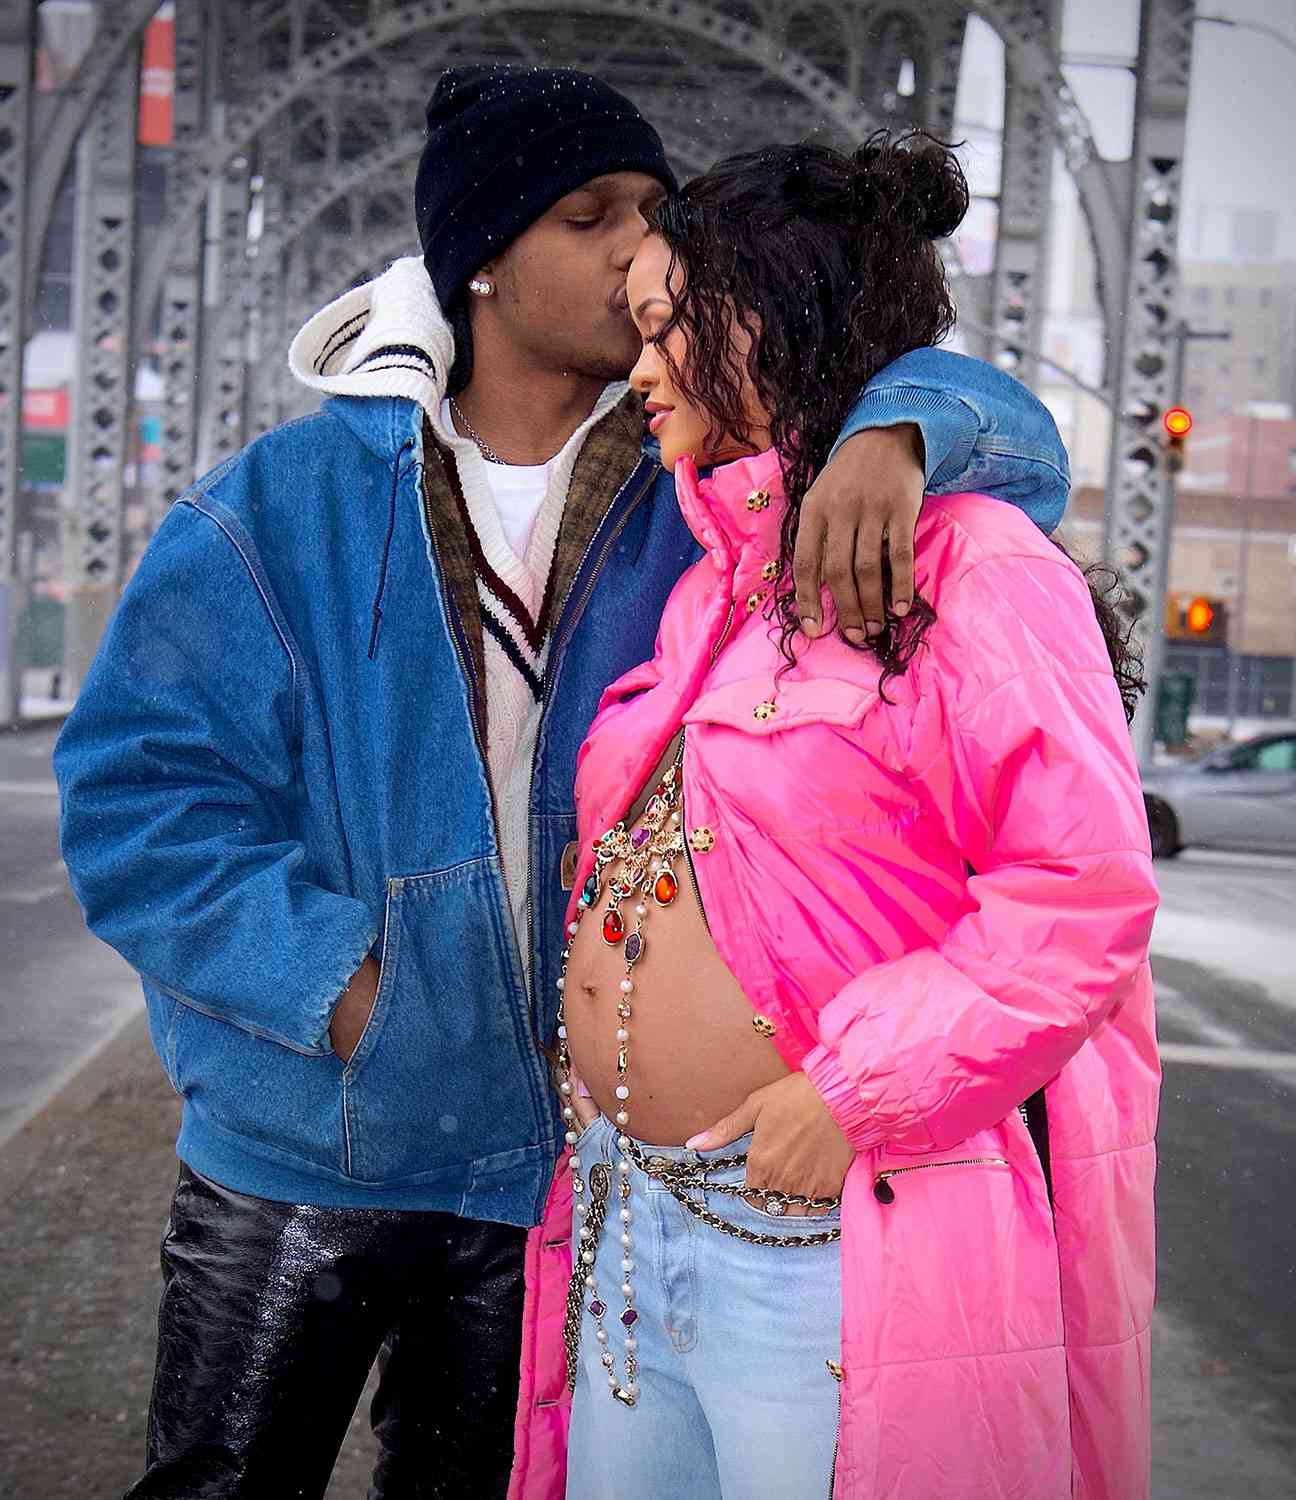 1.28.22, friday--Rihanna is set to be a Mom for the very first time ! She was spotted out in NYC with Boyfriend, ASAP Rocky this weekend, shocking the world with her baby bump on full display. The inseparable pair stepped out in Harlem, his hometown, and were seen looking happier than ever. Rihanna’s bare bump was adorned by an elegant gold cross with colorful jewels, as she leaned into her boyfriend’s tender kiss on her forehead. She looked absolutely radiant as they enjoyed a walk in the snowy brisk air together before headed back to their new apartment together to prepare for parenthood. MANDATORY BYLINE - DIGGZY/Shutterstock